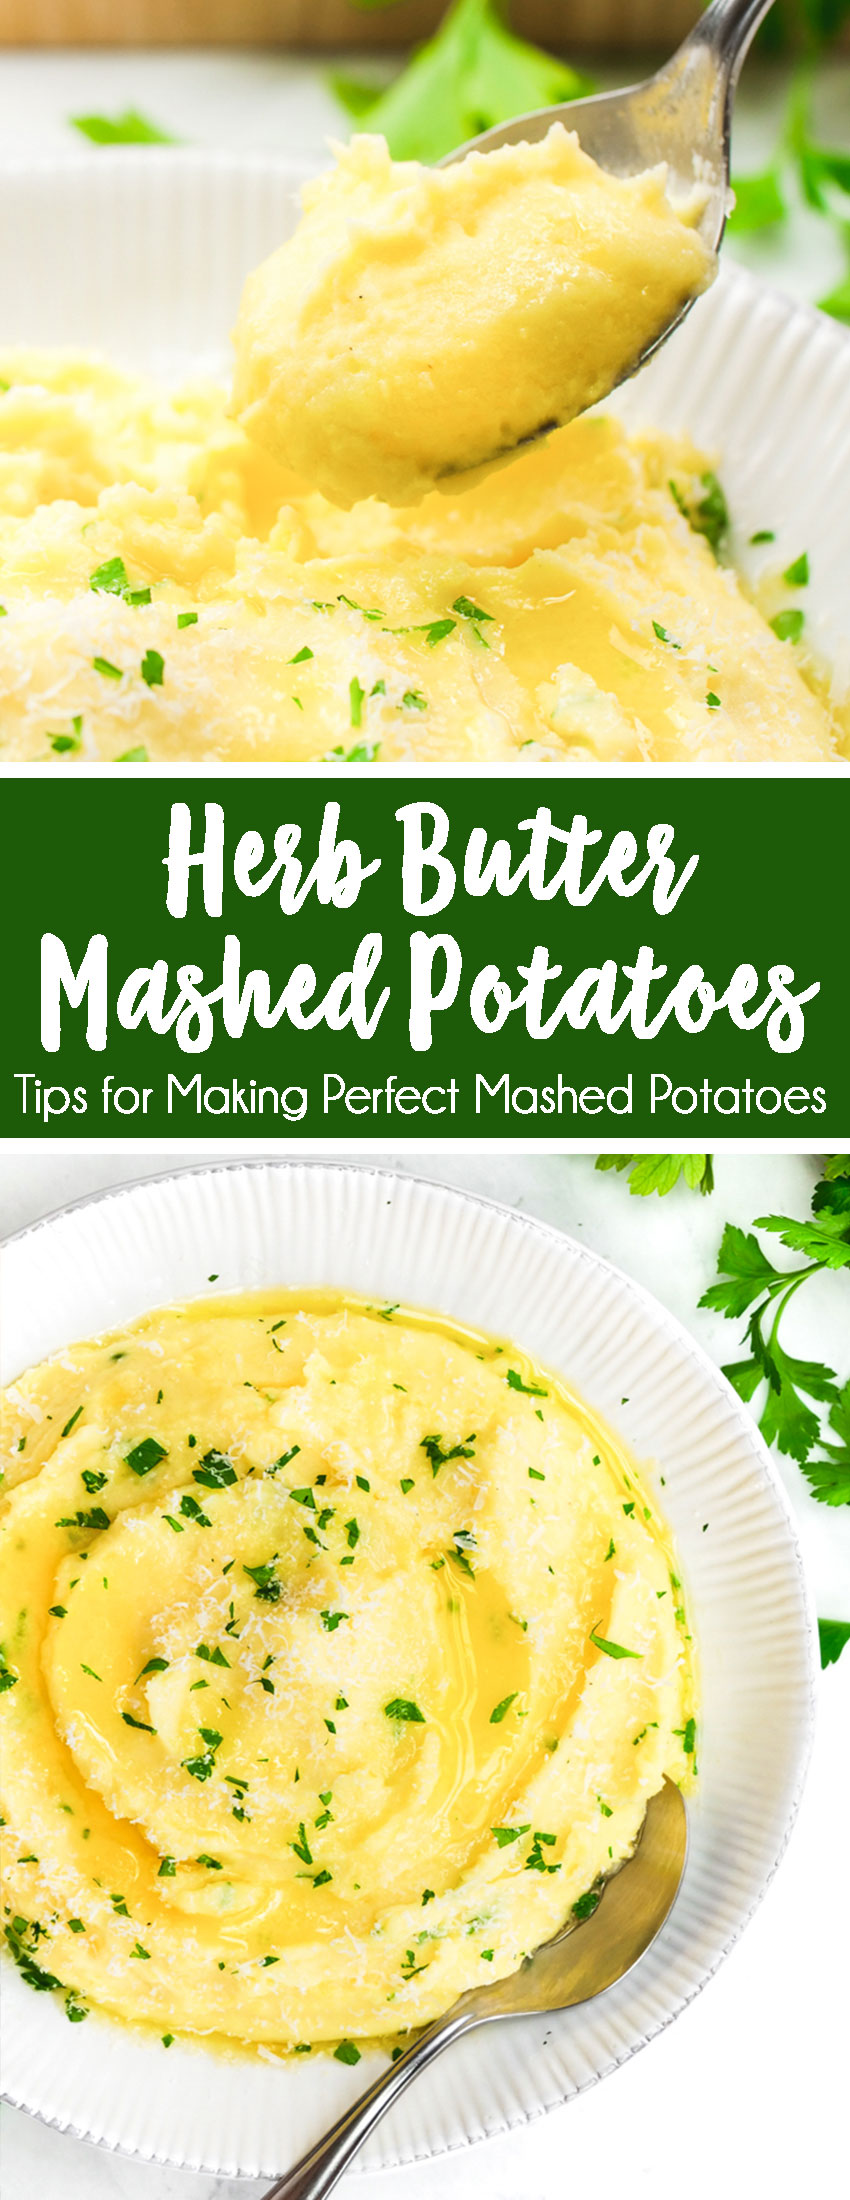 How to make mashed potatoes, these herb butter mashed potatoes are light, fluffy, and sooo flavorful